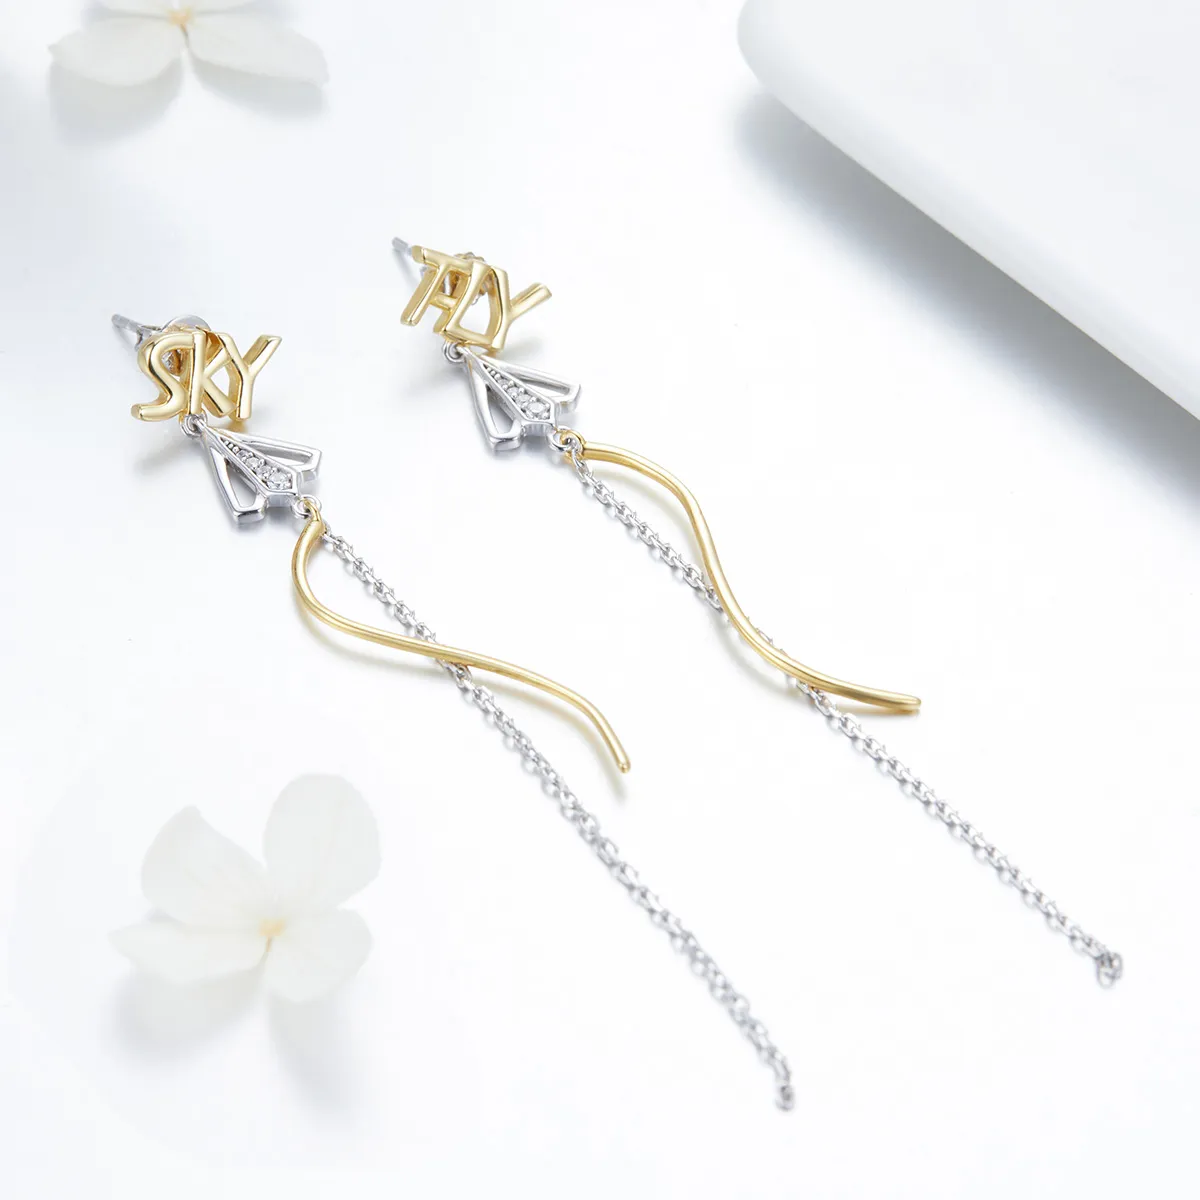 Pandora Style Fly to Sky Hanging Earrings - BSE026